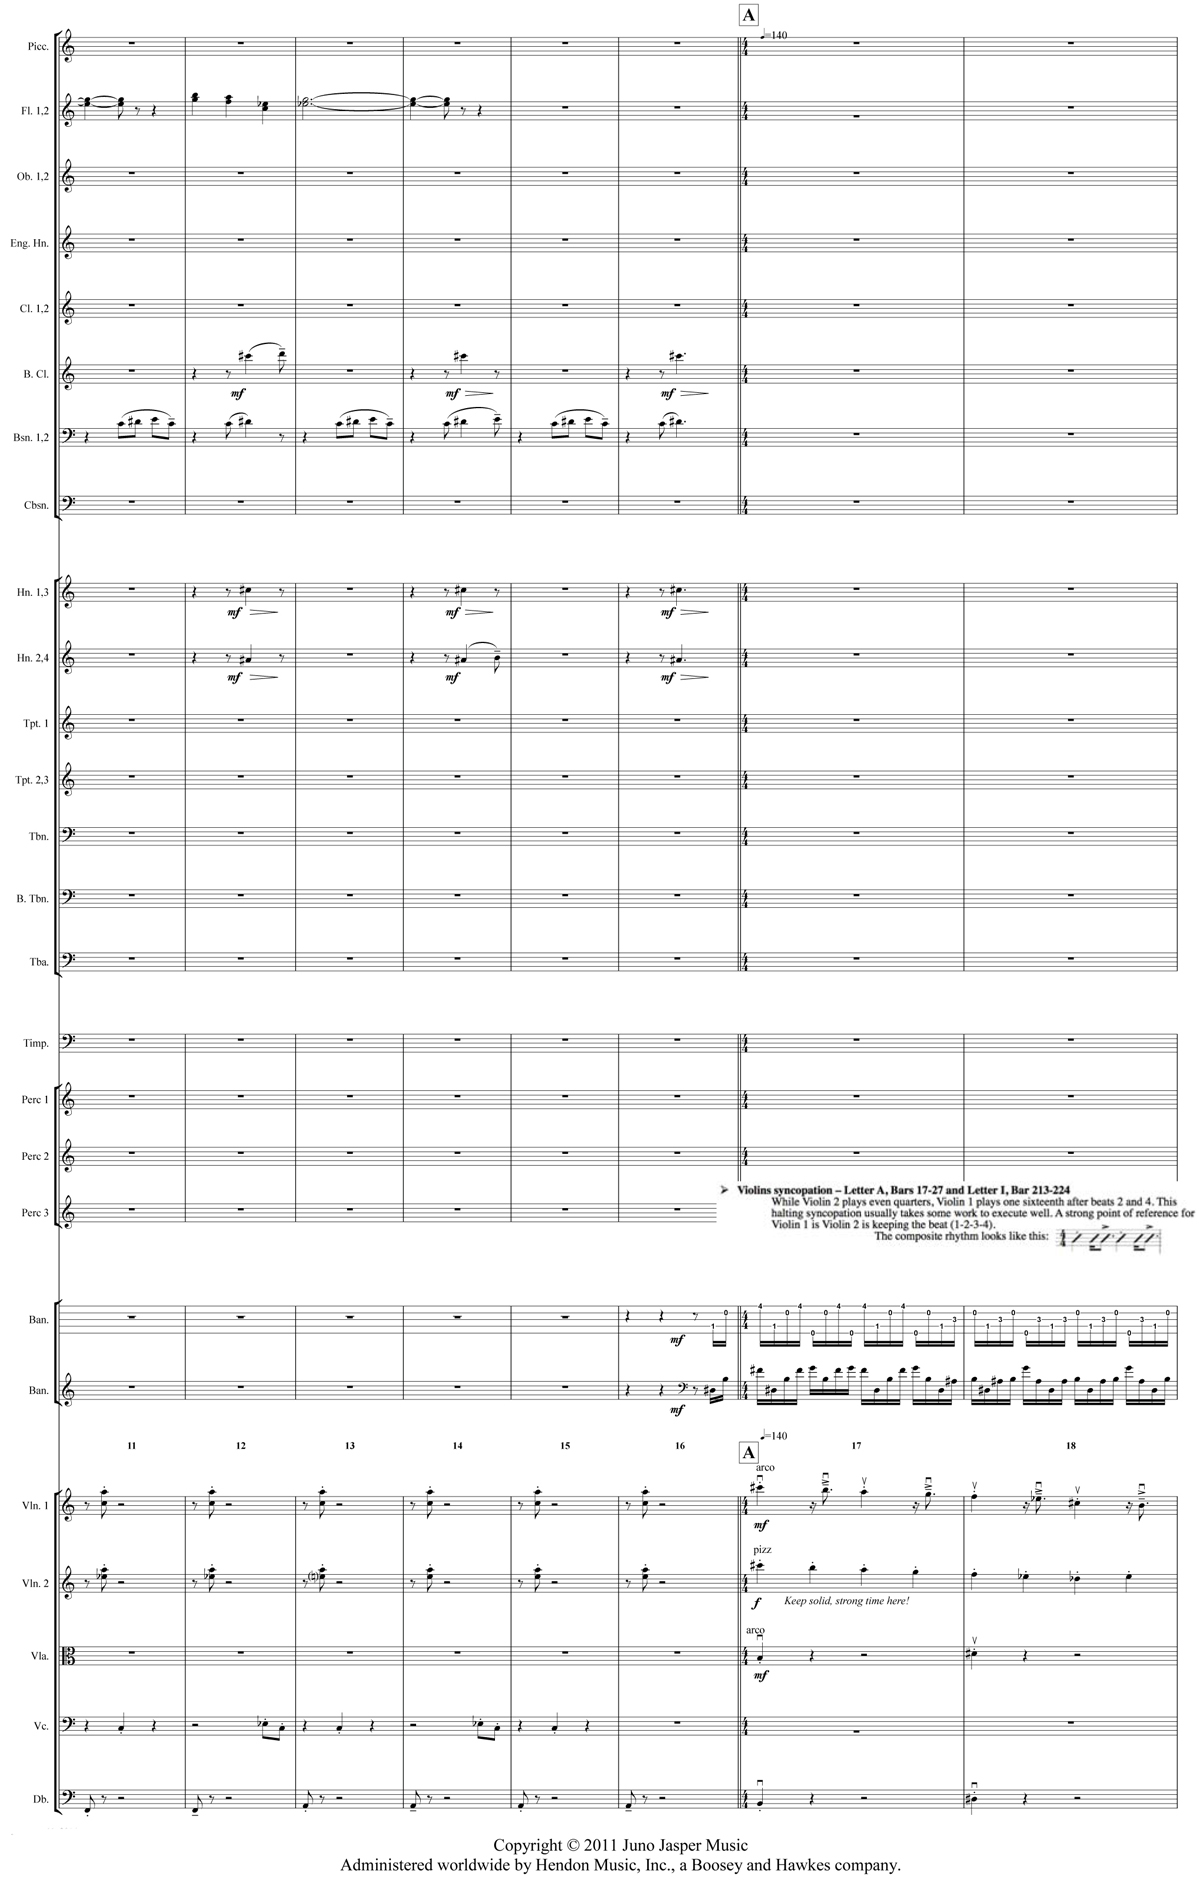 Excerpt from the full orchestral score of Béla Fleck's The Imposter